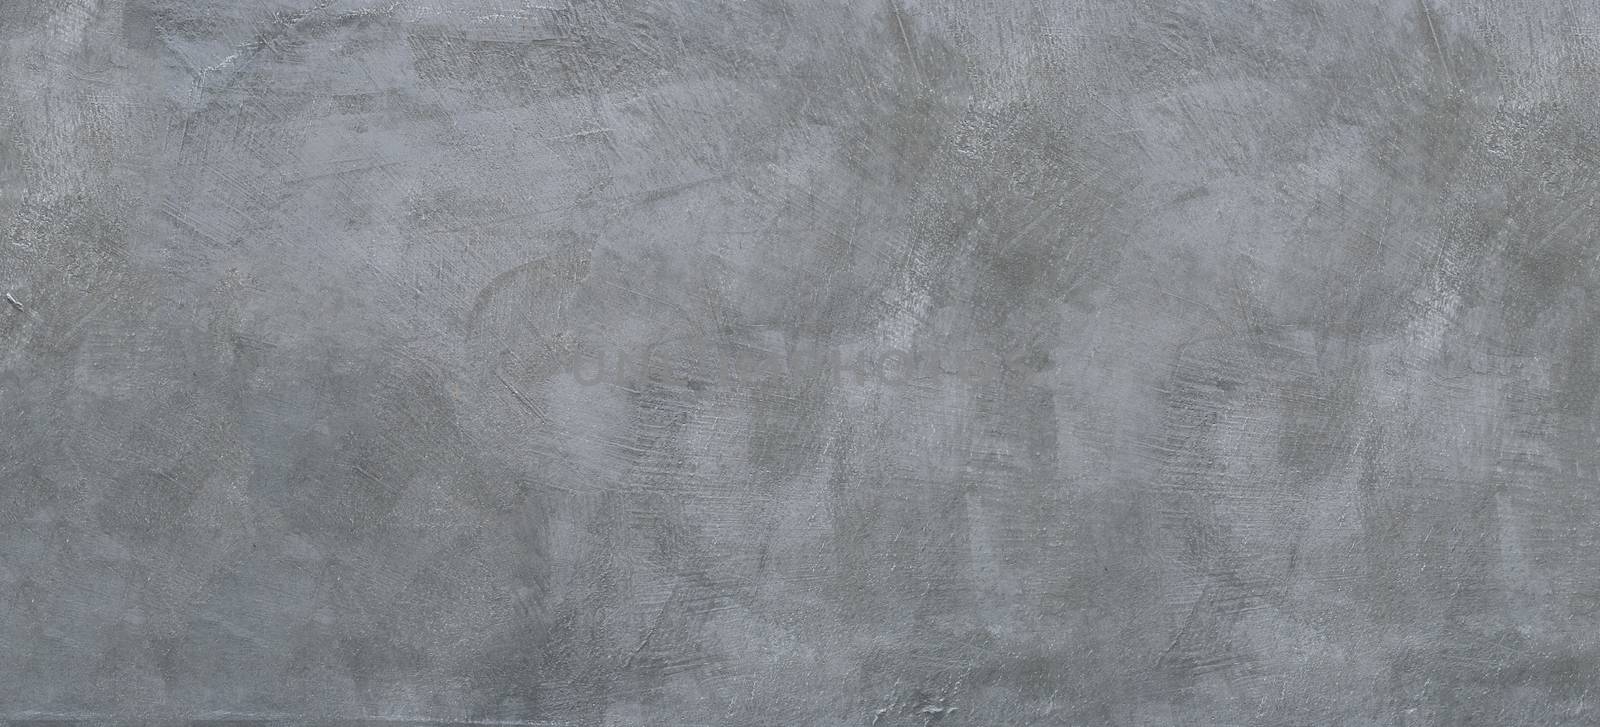 Texture of concrete wall background. by Bowonpat